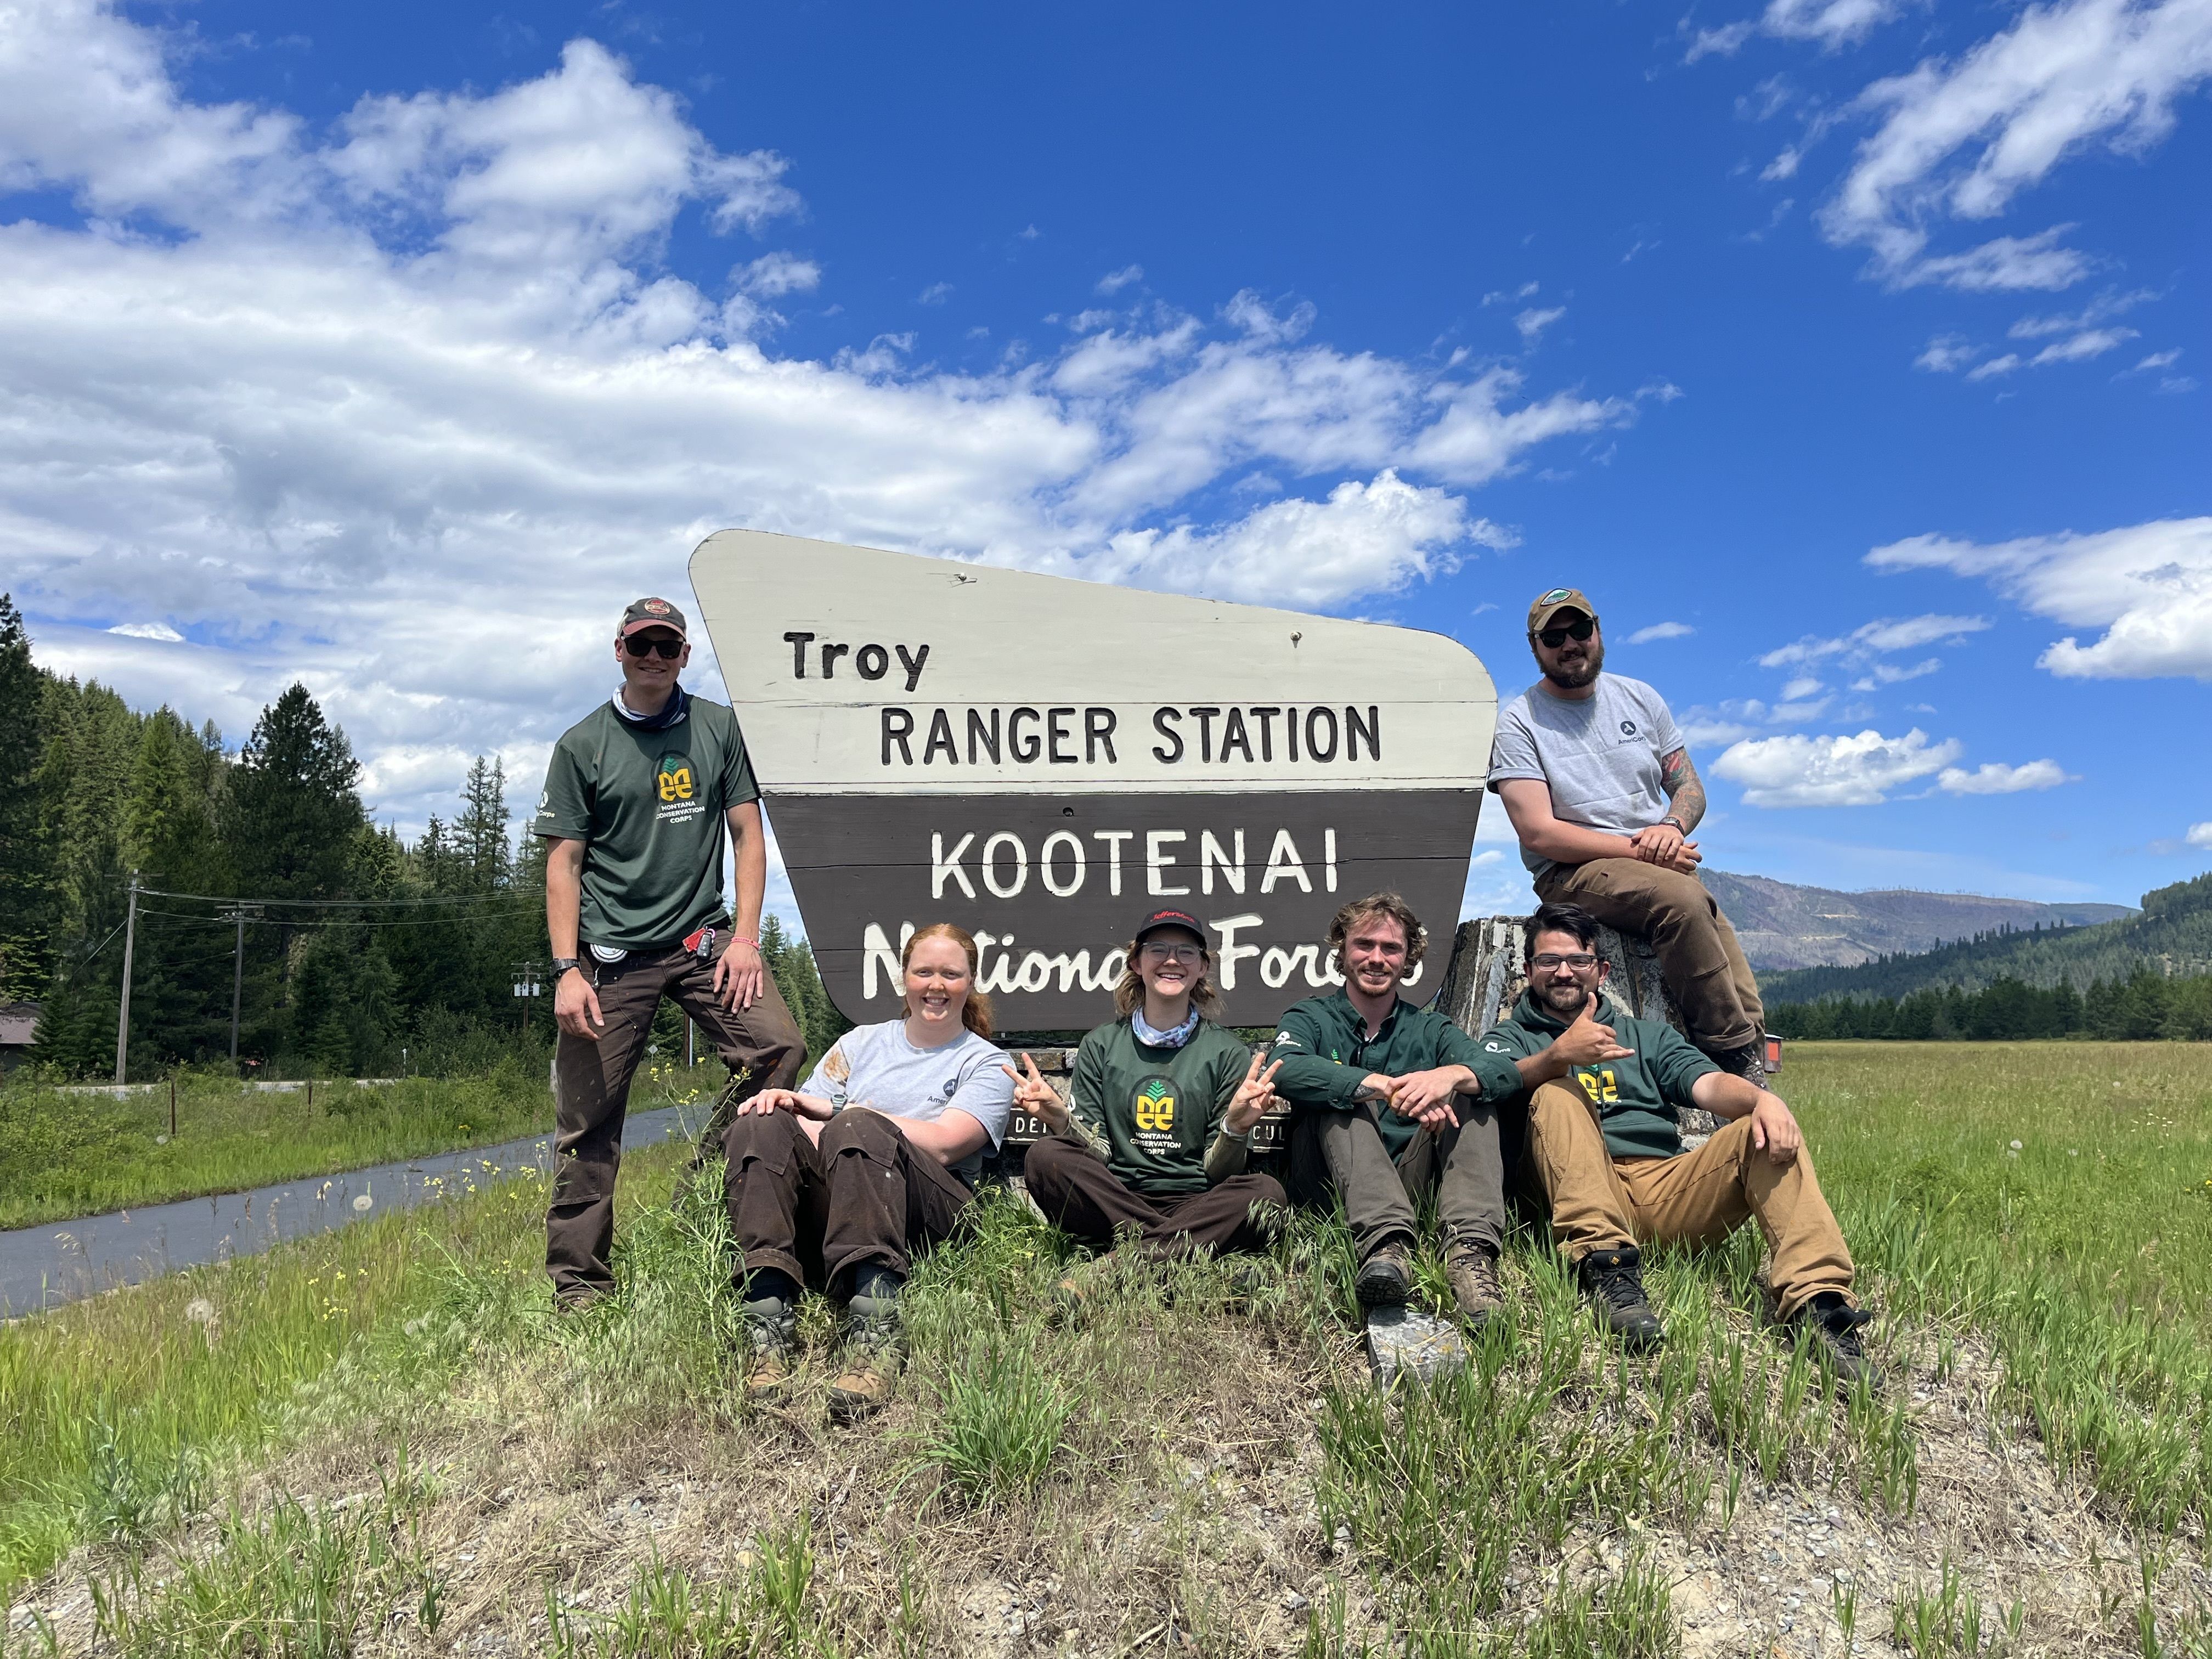 A crew sits and stands around a Forest Service sign that says "Troy Ranger Station, Kootenai National Forest"